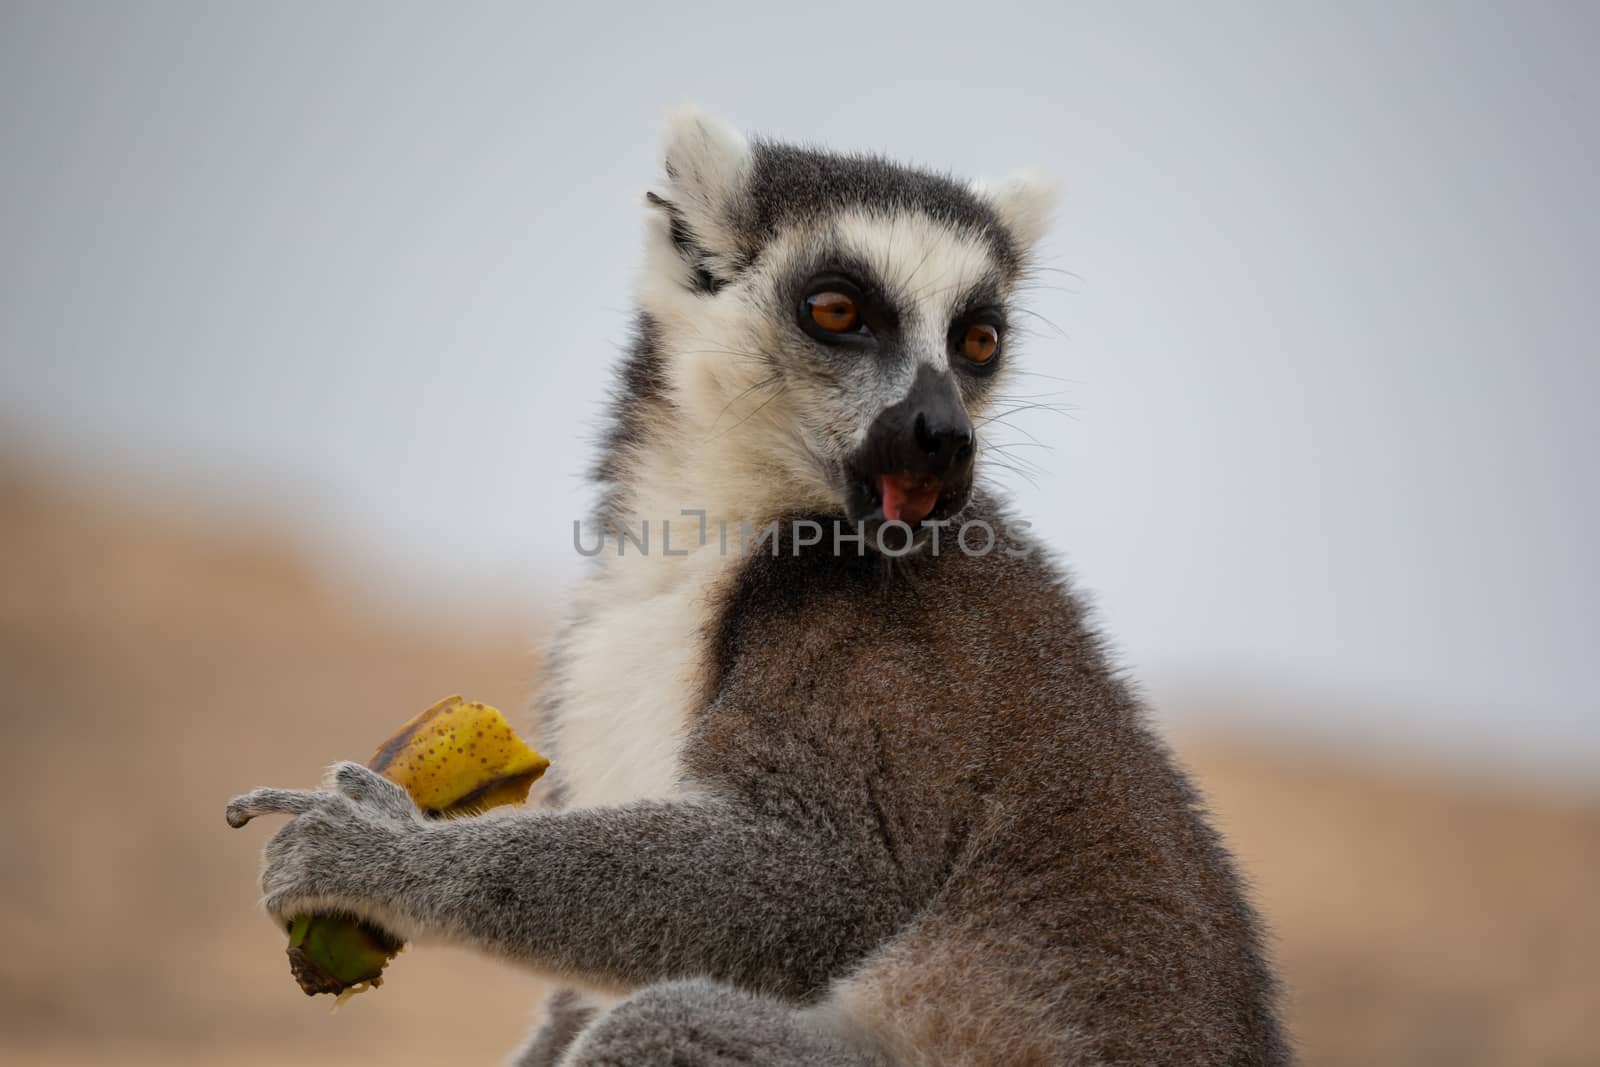 One ring-tailed lemur with a banana in close-up